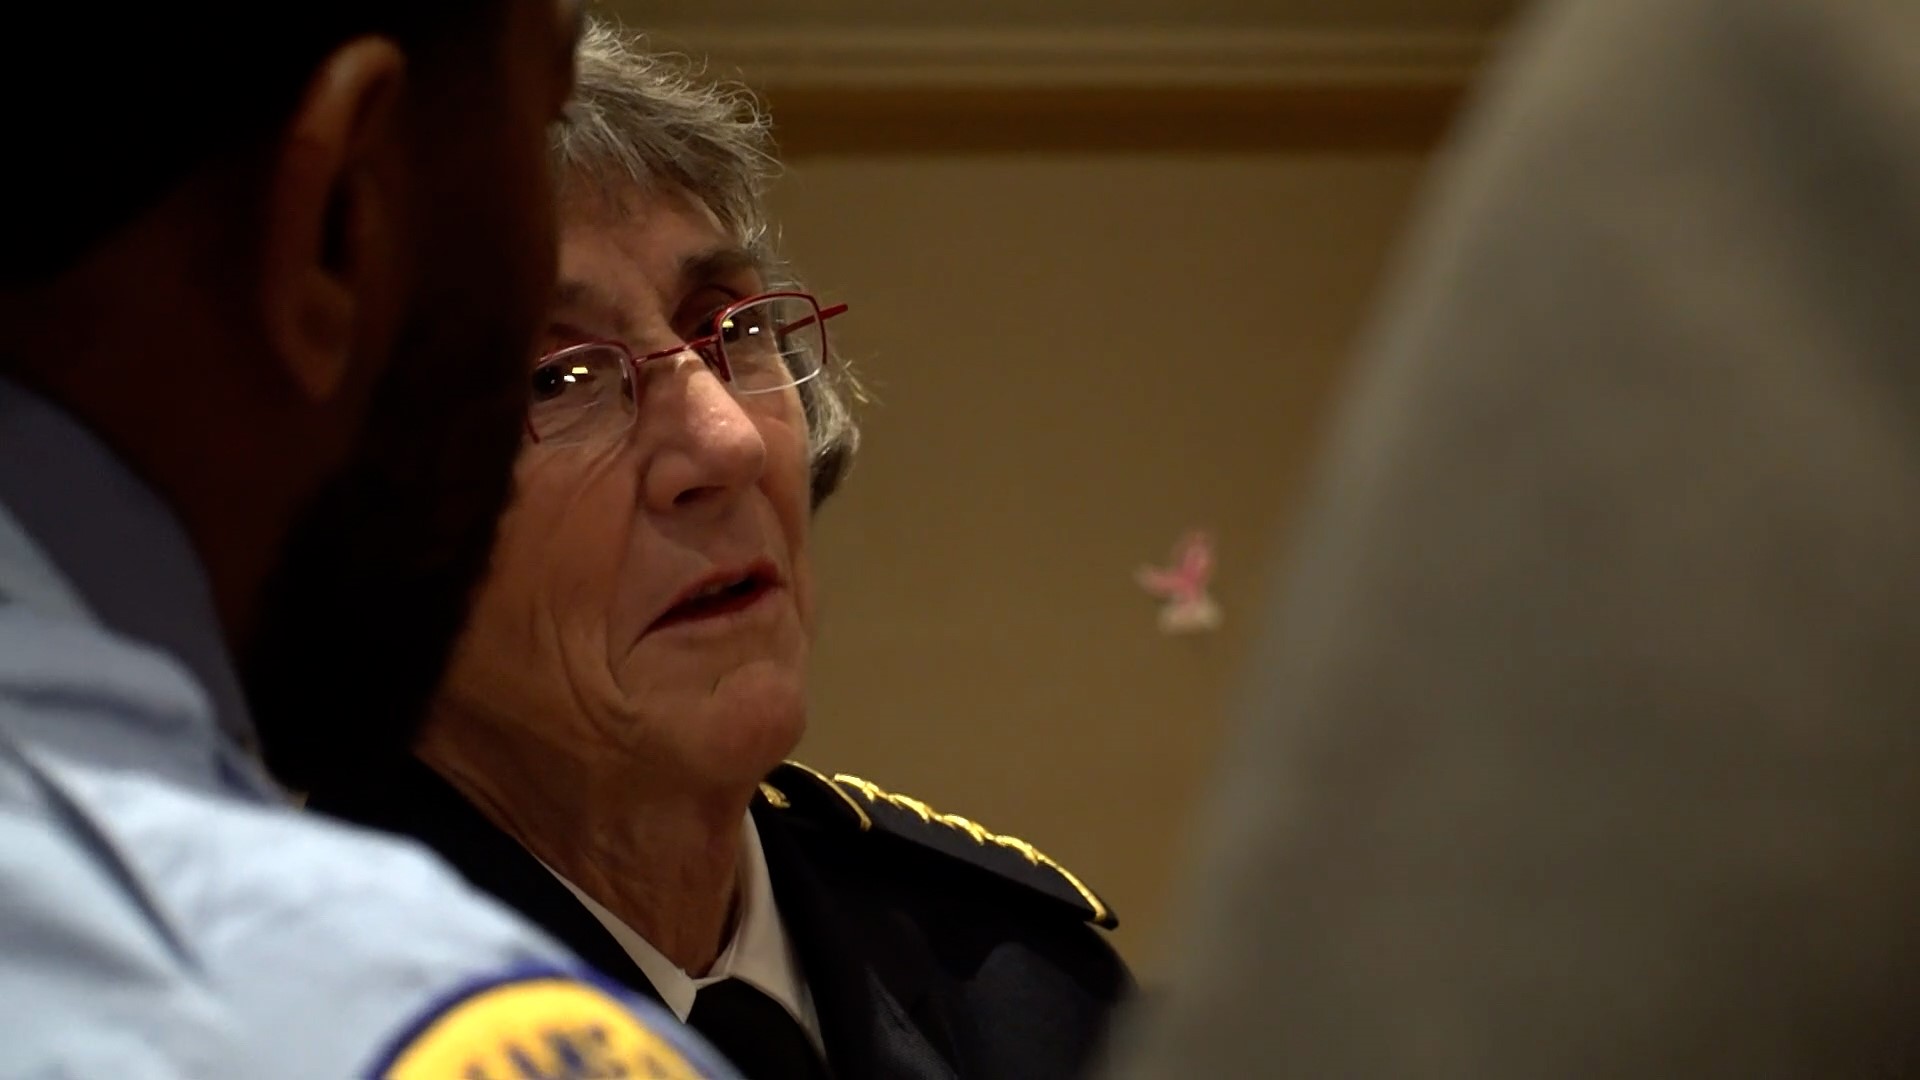 City Council concludes historic first confirmation hearing on new NOPD Chief approval